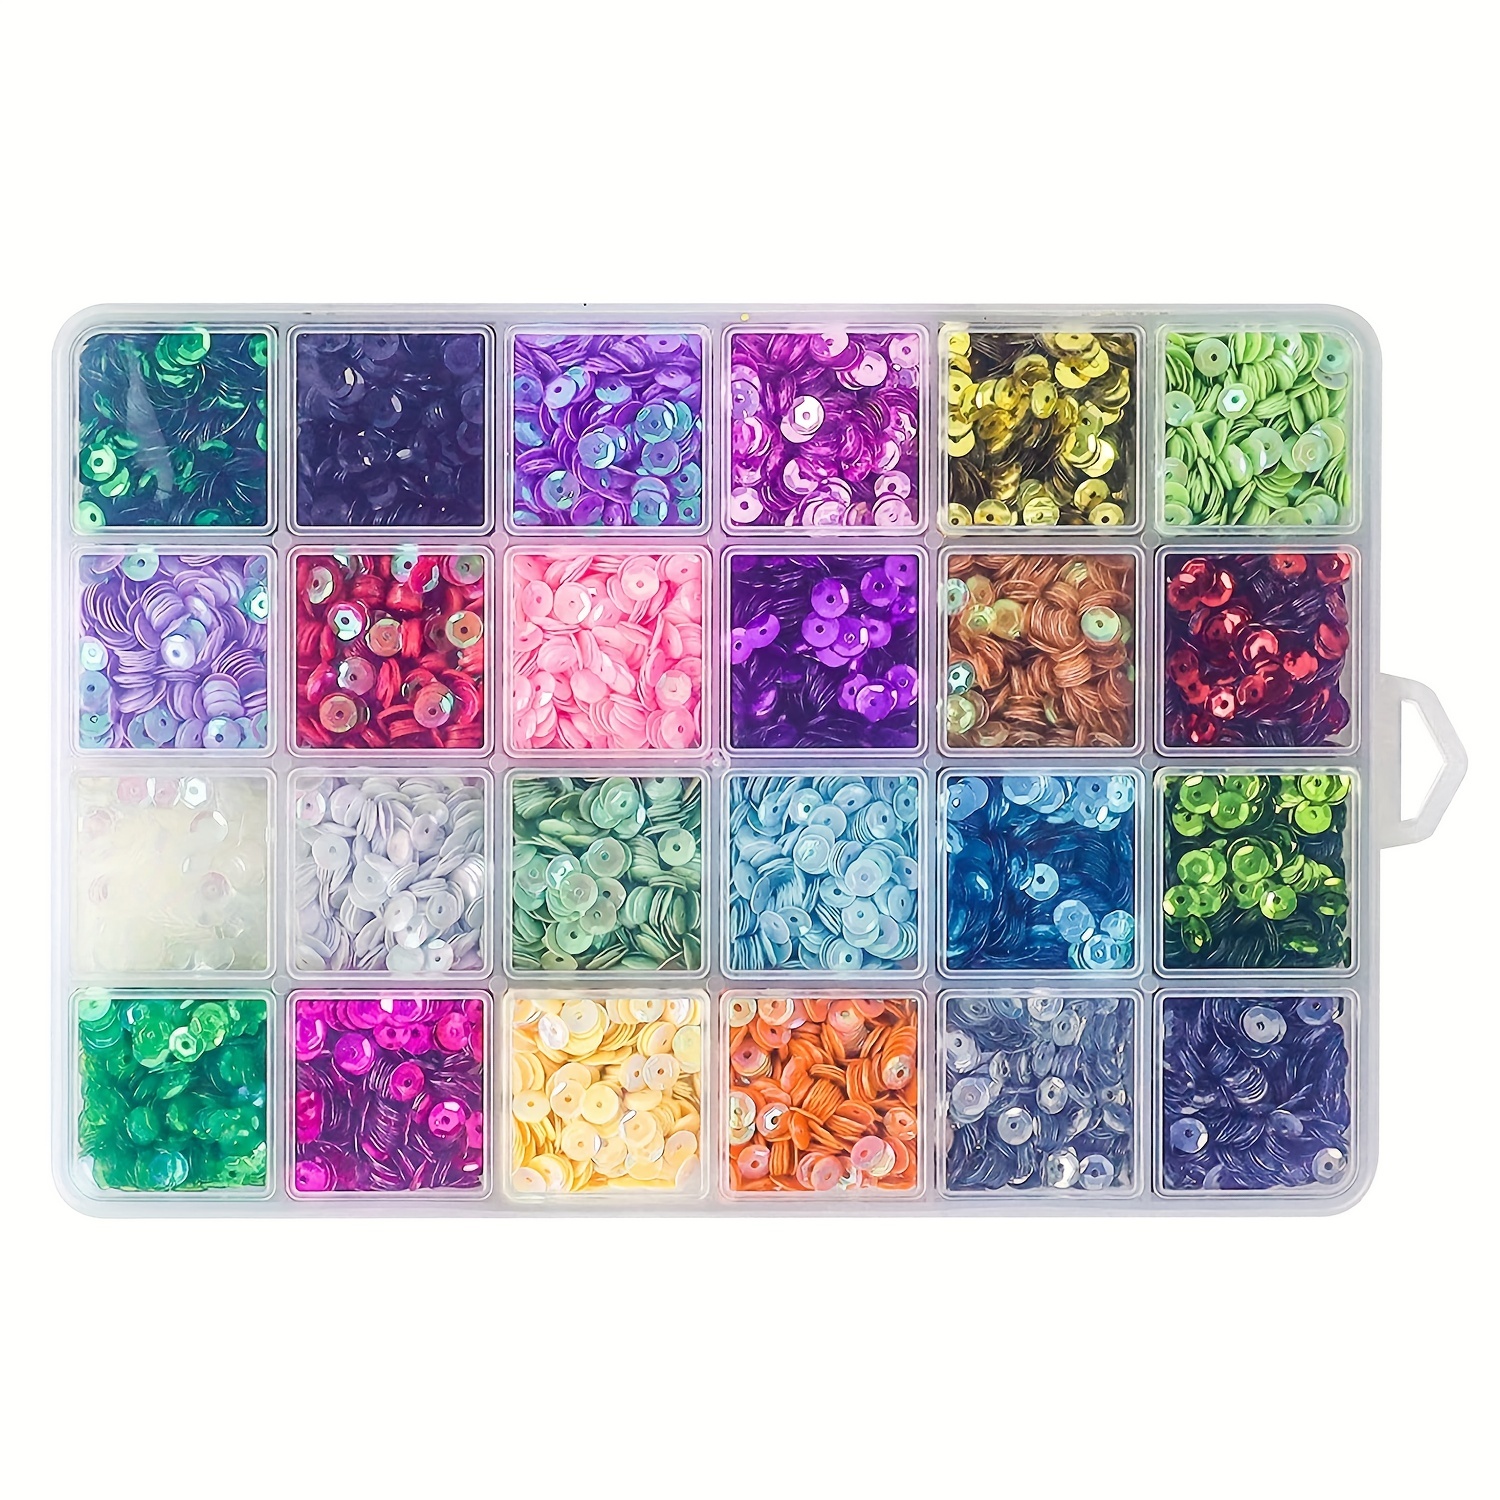 Plastic Sequin Pins (Pack of 500) Craft Supplies